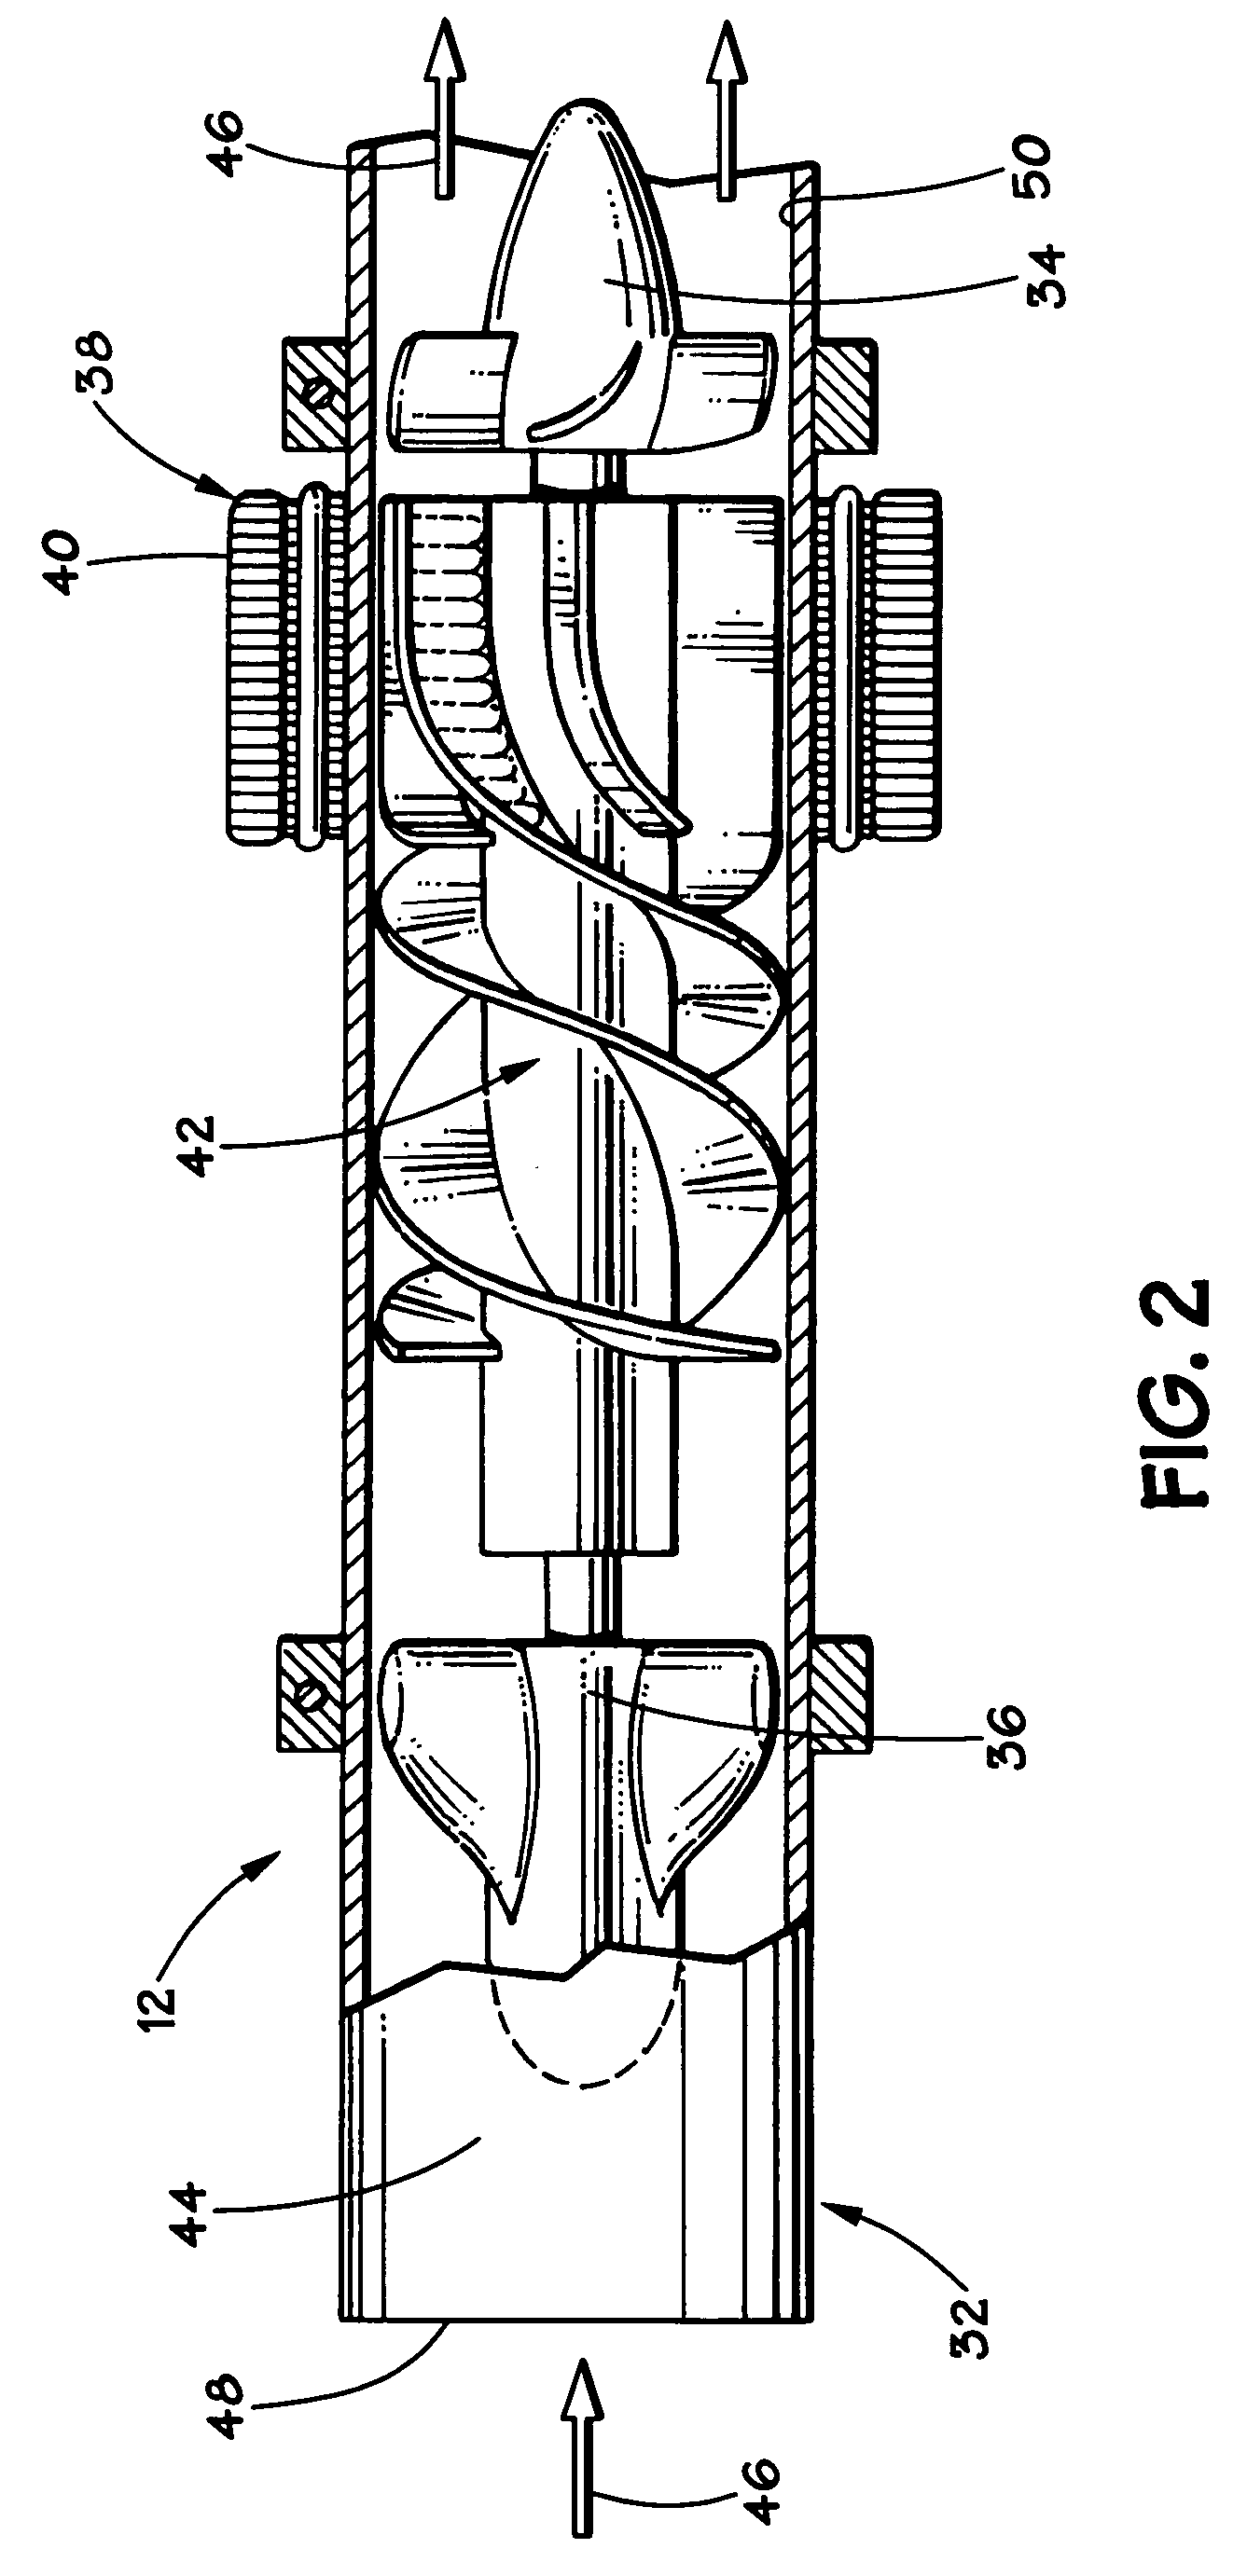 Blood pump system and method of operation